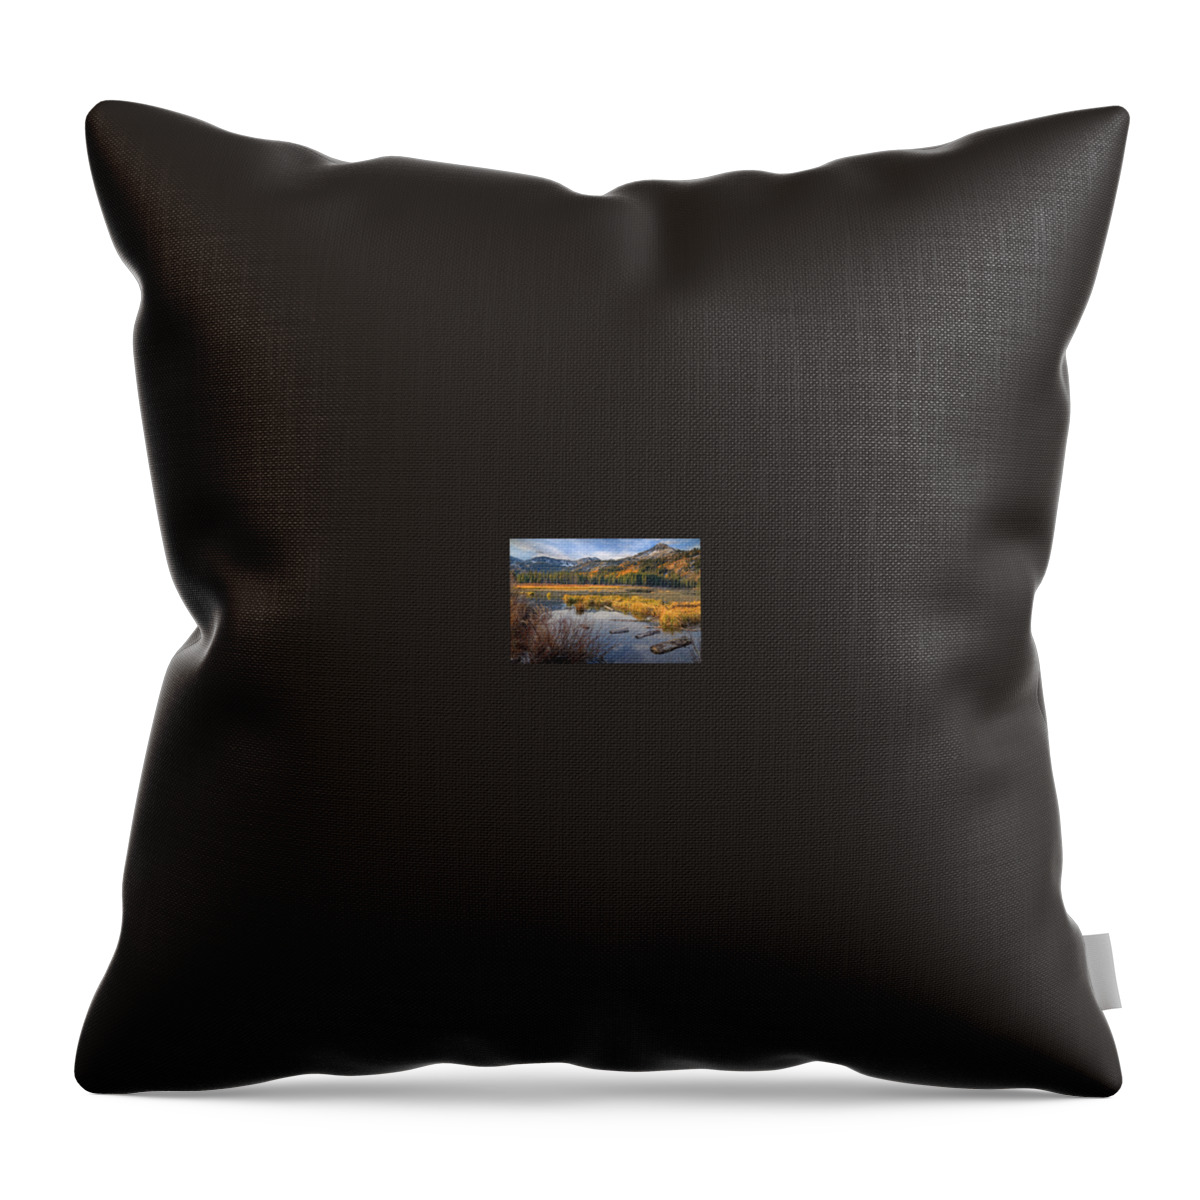  Silver Lake Throw Pillow featuring the photograph Silver Lake #1 by Douglas Pulsipher